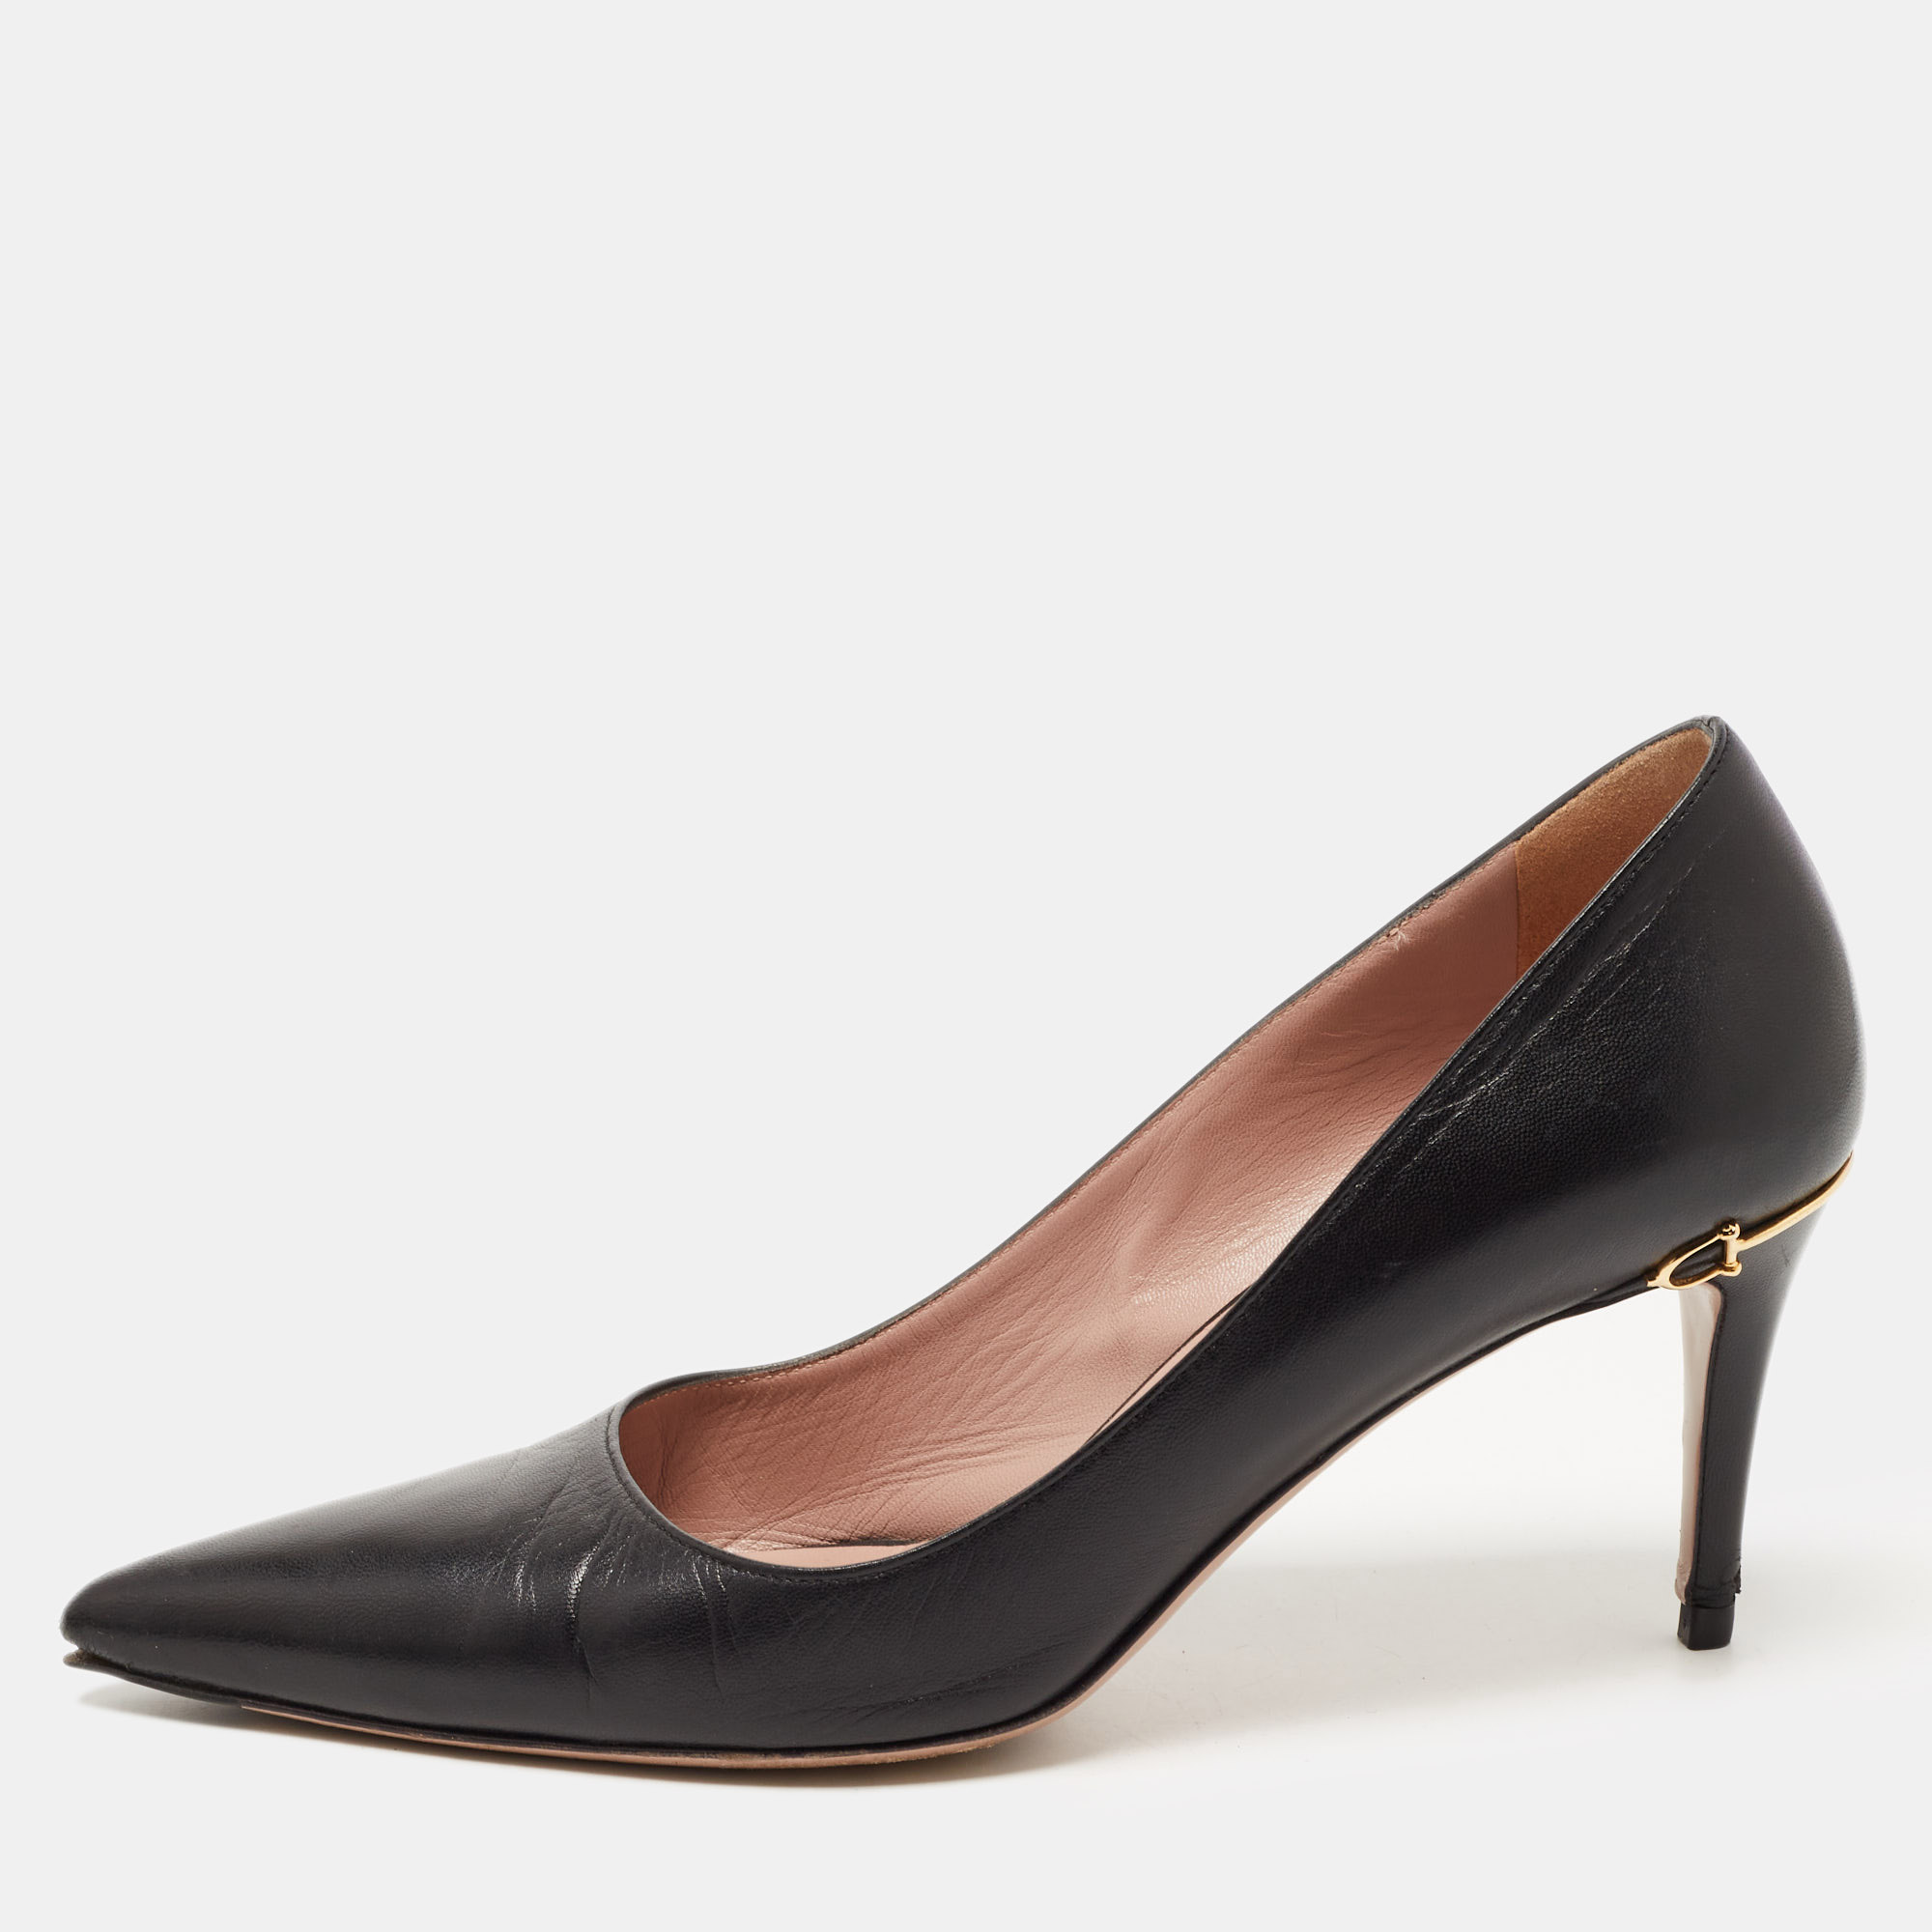 Gucci Black Leather Pointed Toe Pumps Size 36.5